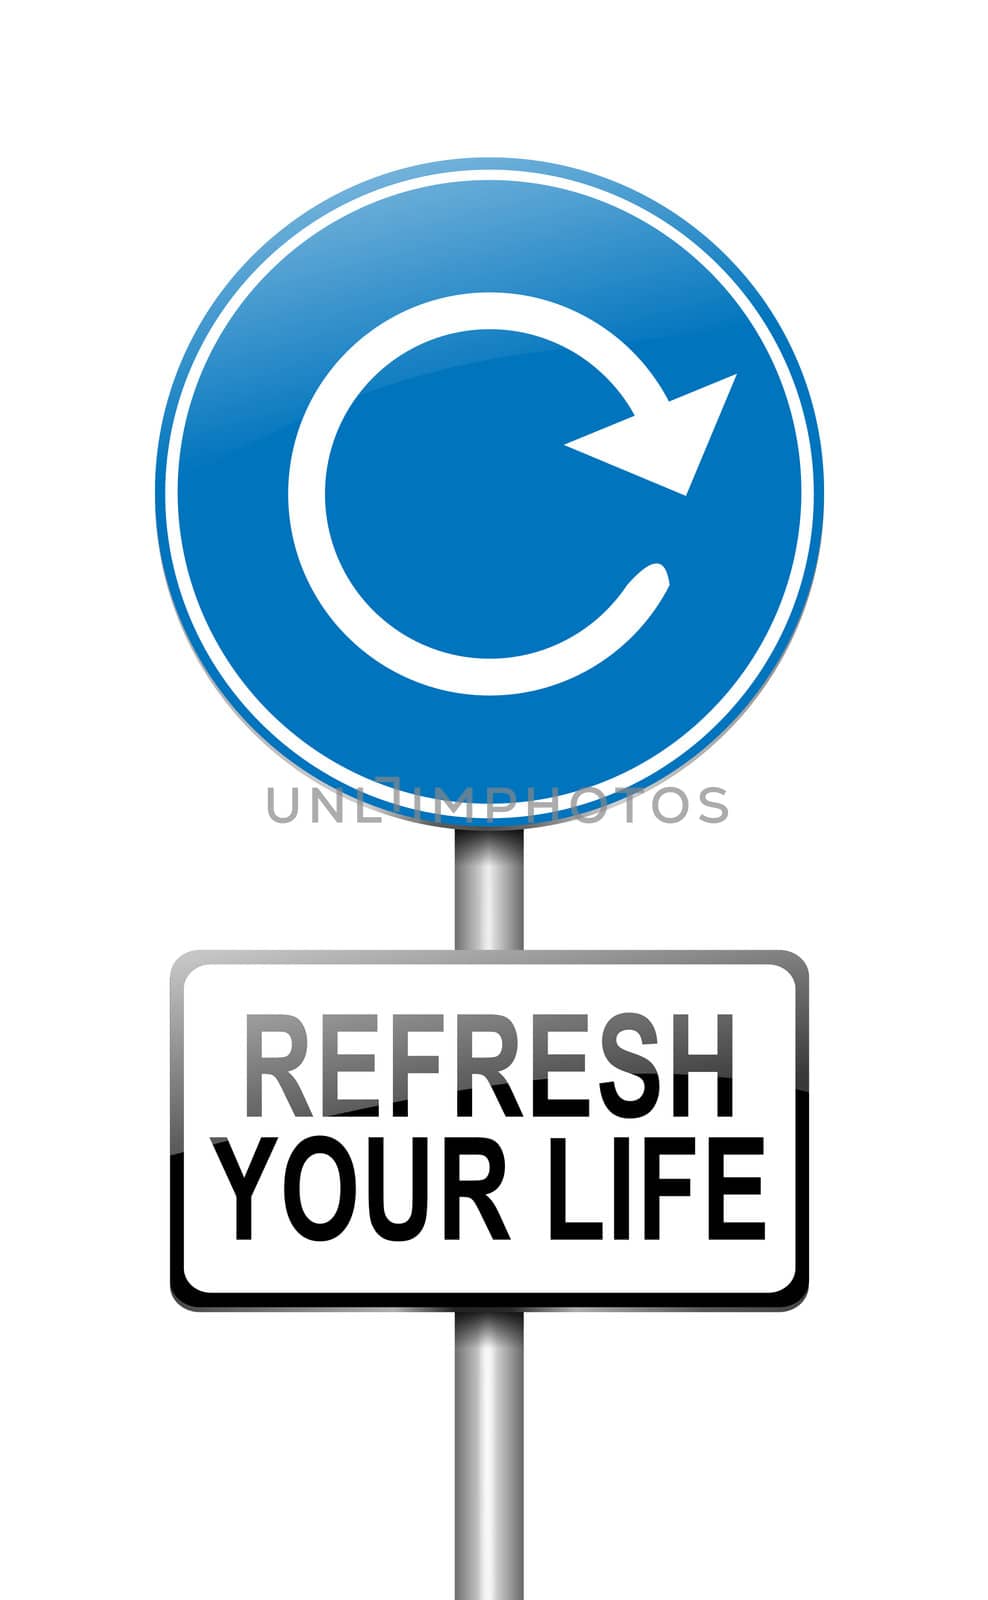 Illustration depicting a sign with a refresh your life concept.